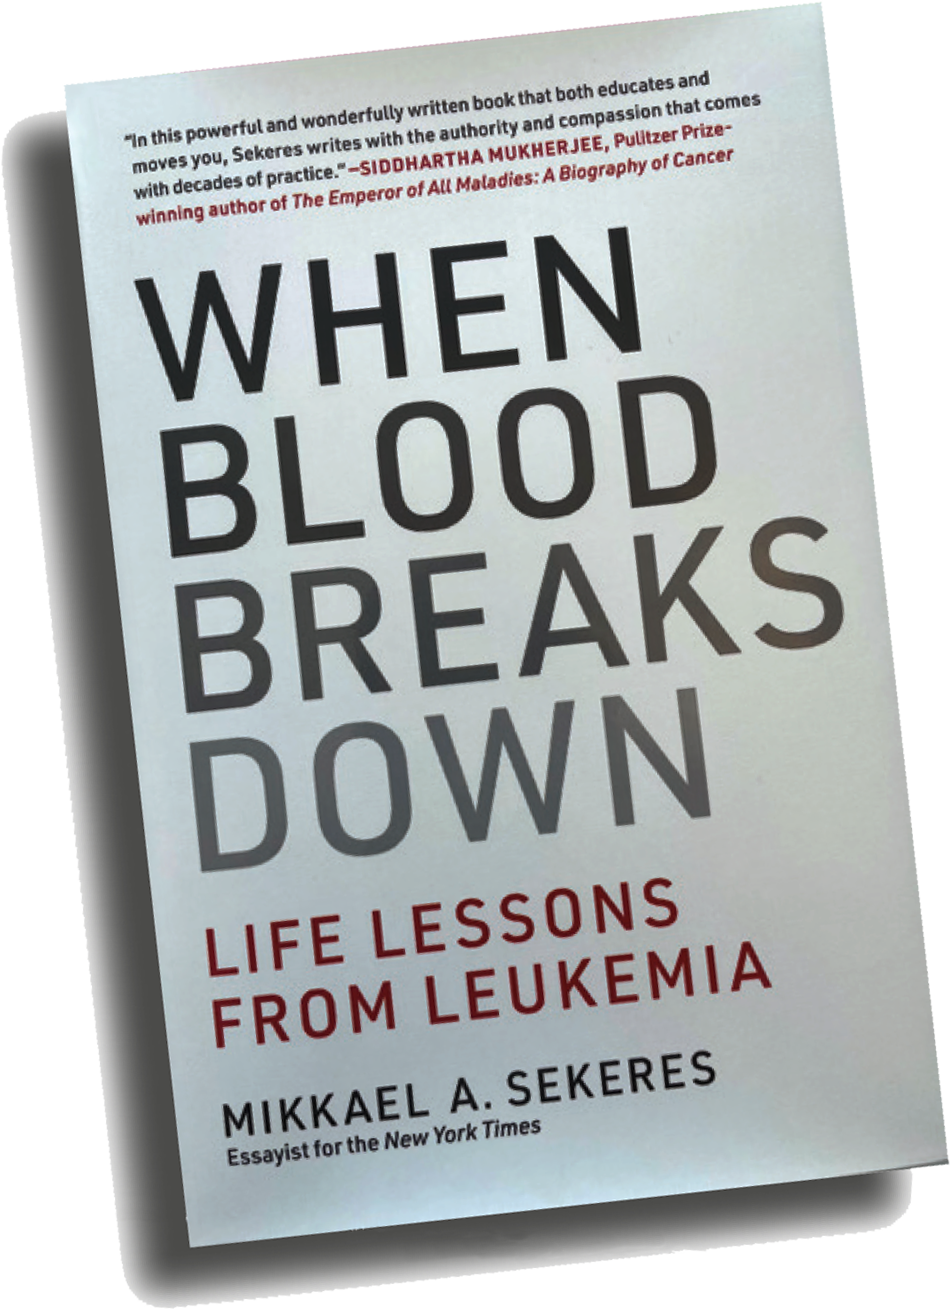 The cover page of the book titled, When Blood Breaks Down, Life Lessons from Leukemia, written by Mikkael A. Sekeres.